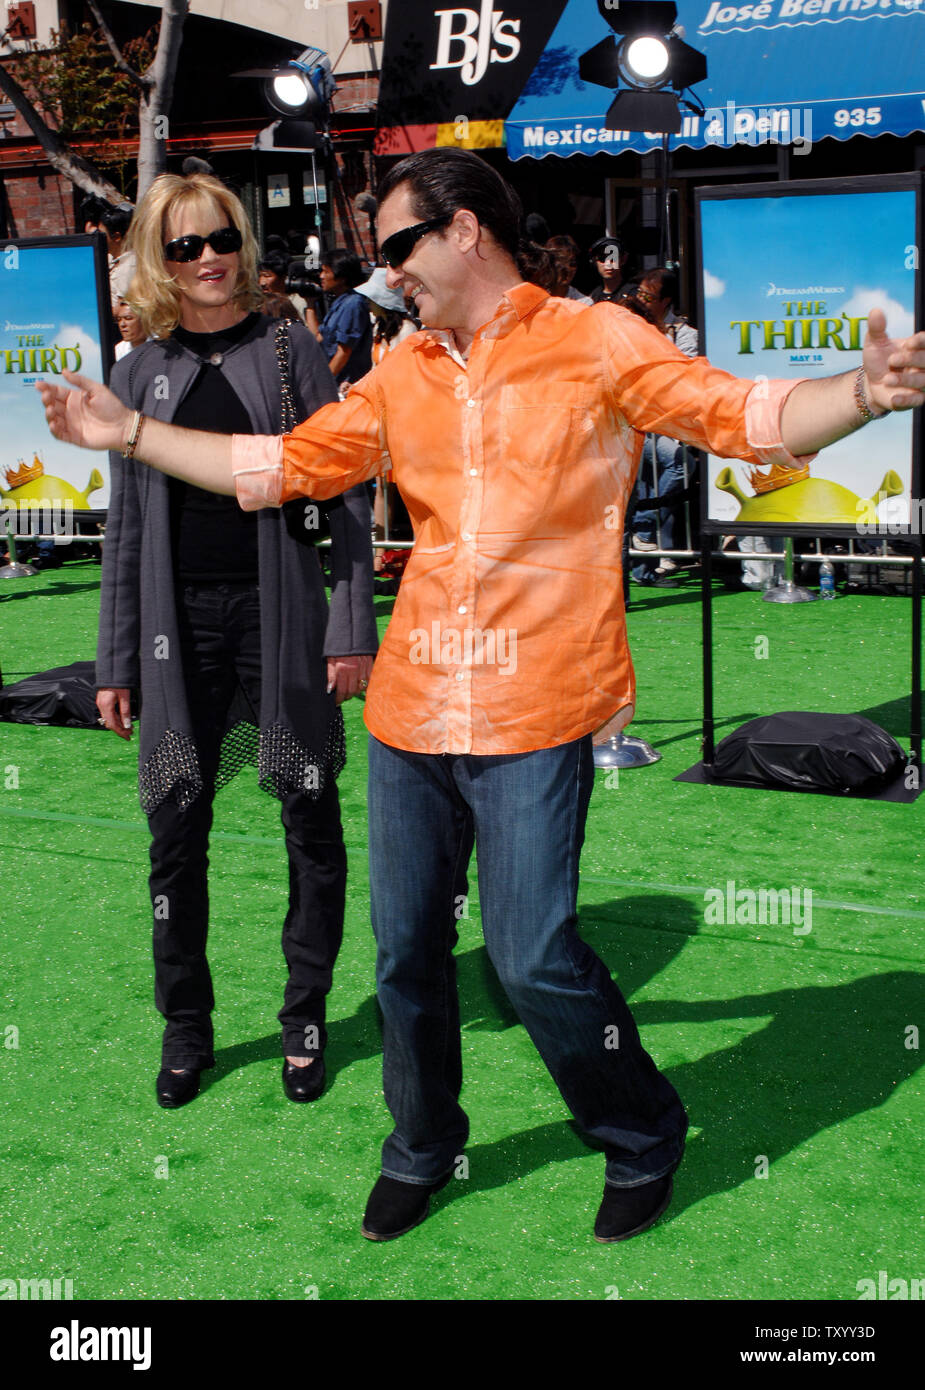 Actor Antonio Banderas, the voice of Puss in Boots in the animated motion picture 'Shrek the Third' arrives with his wife, actress Melanie Griffith for the premiere of the film in the Westwood section of Los Angeles on May 6, 2007. (UPI Photo/Jim Ruymen) Stock Photo